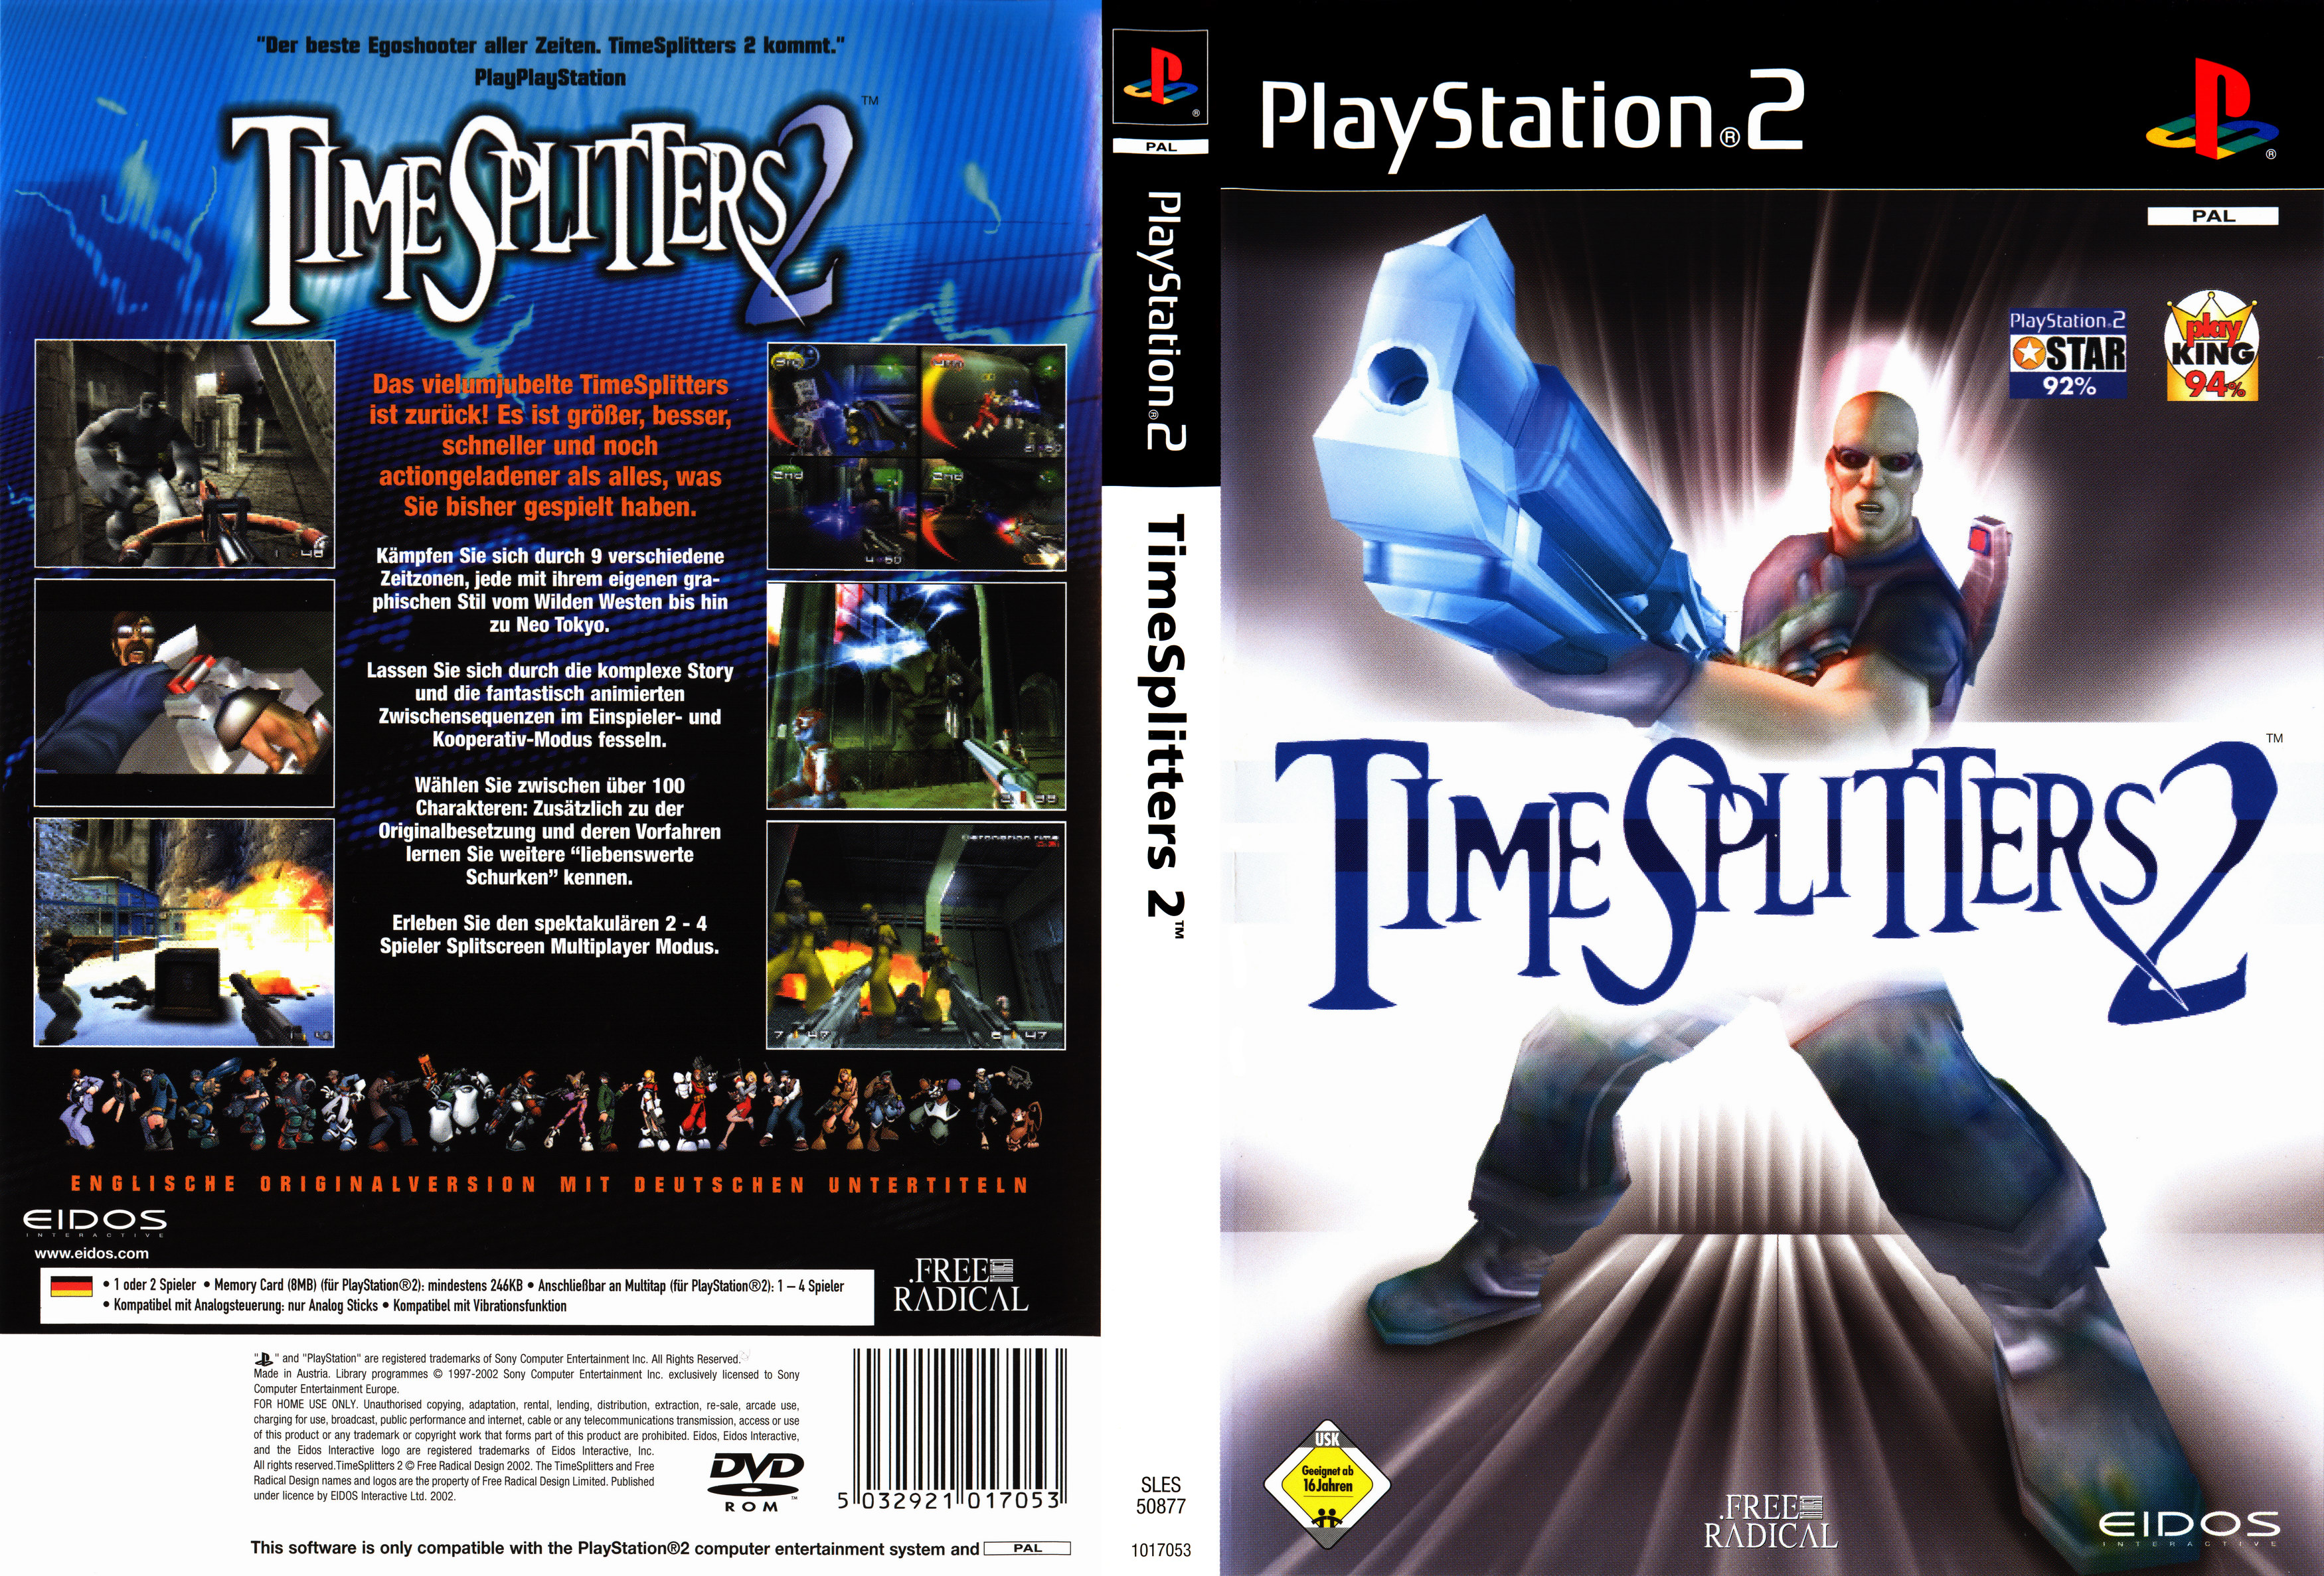 Replicate face to many ps2. PLAYSTATION 2 TIMESPLITTERS 2. TIMESPLITTERS 2 обложка. TIMESPLITTERS 2 Xbox Original. TIMESPLITTERS 2000 ps2.